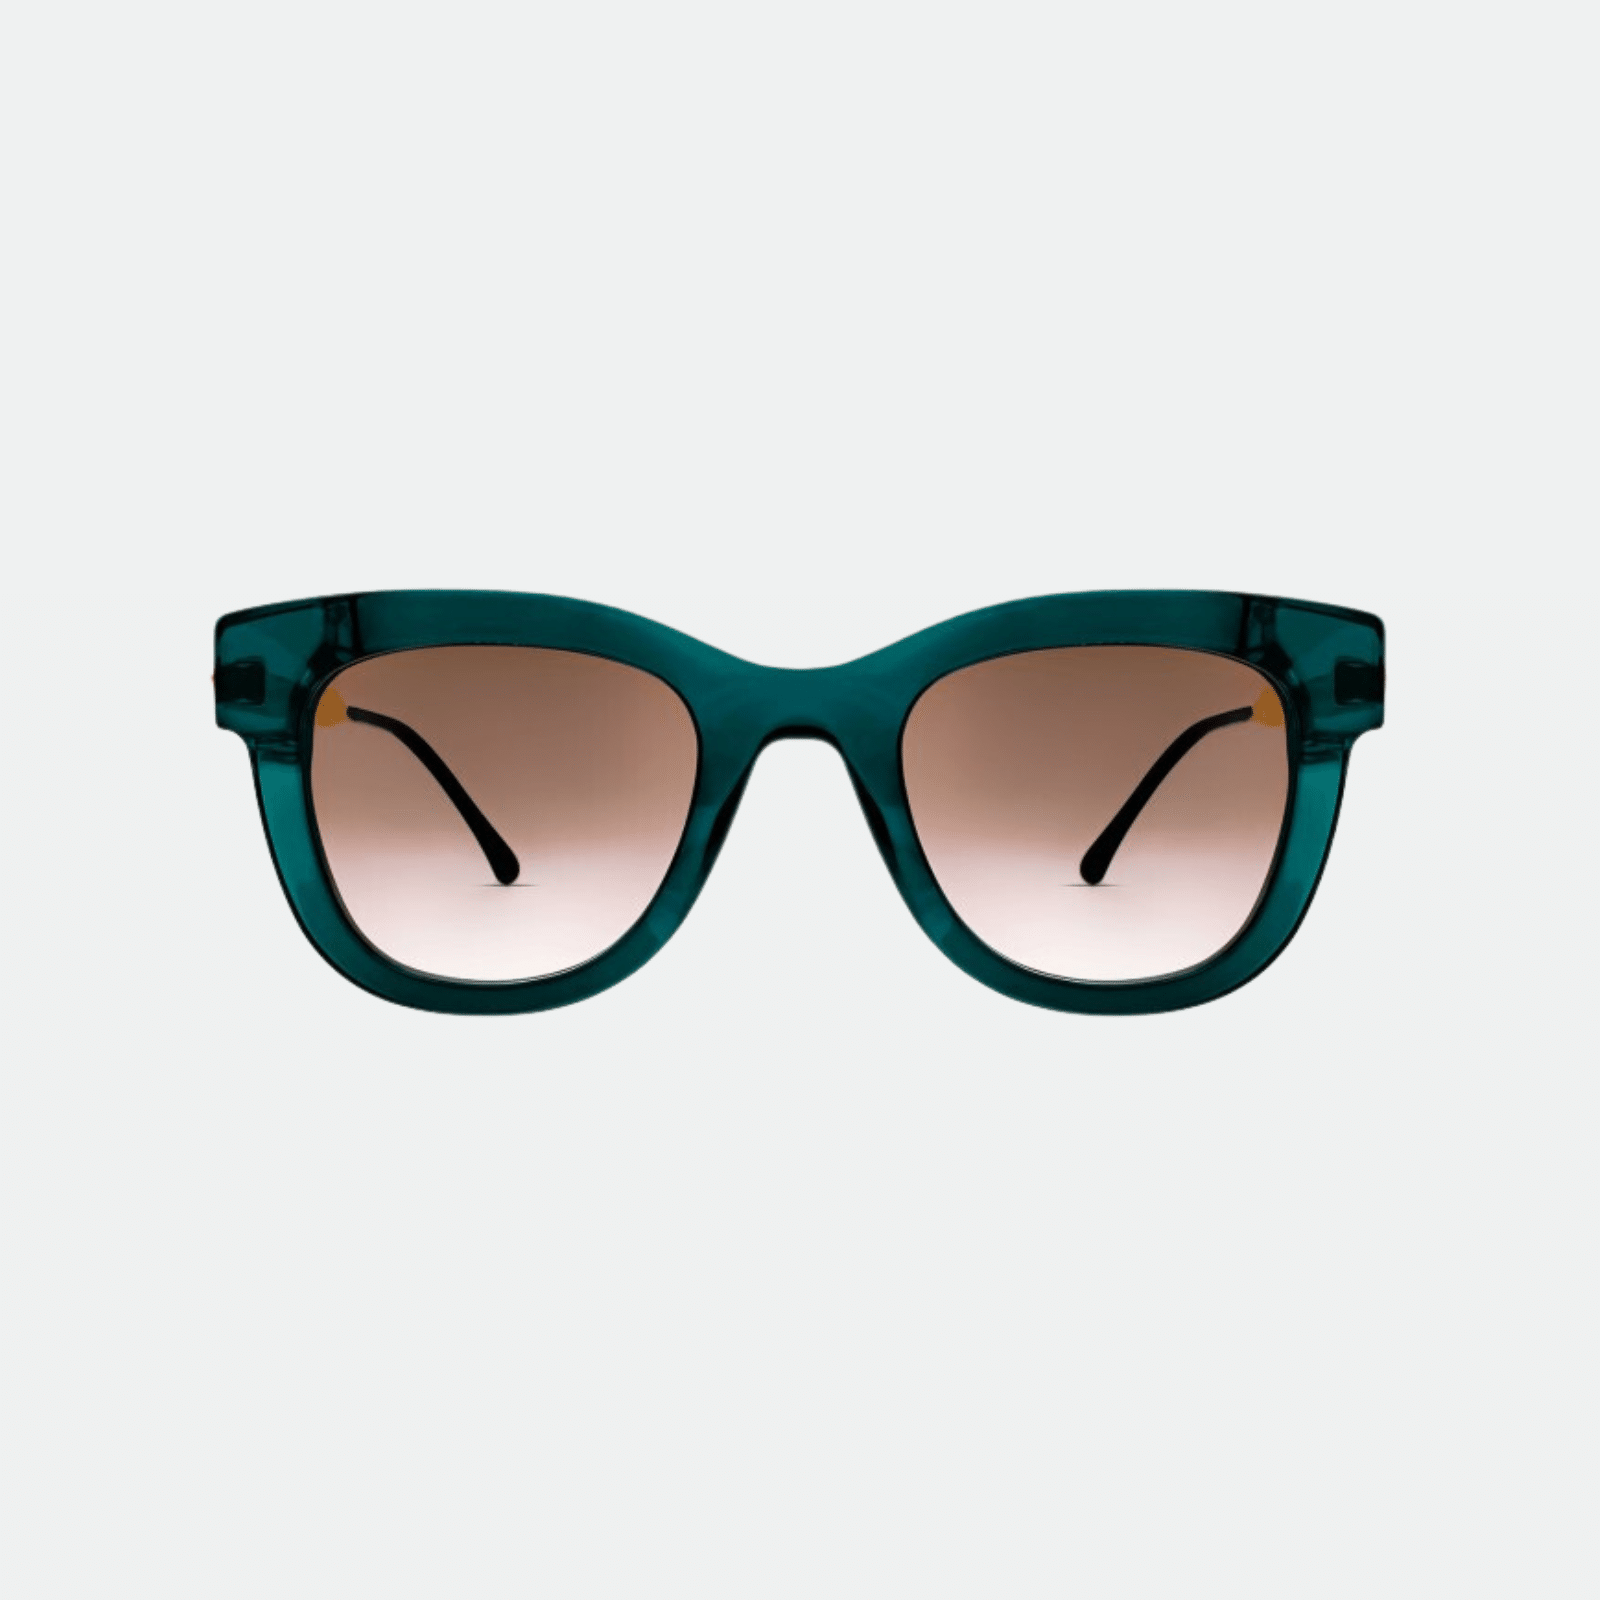 Thierry Lasry Sexxxy - Emerald Green